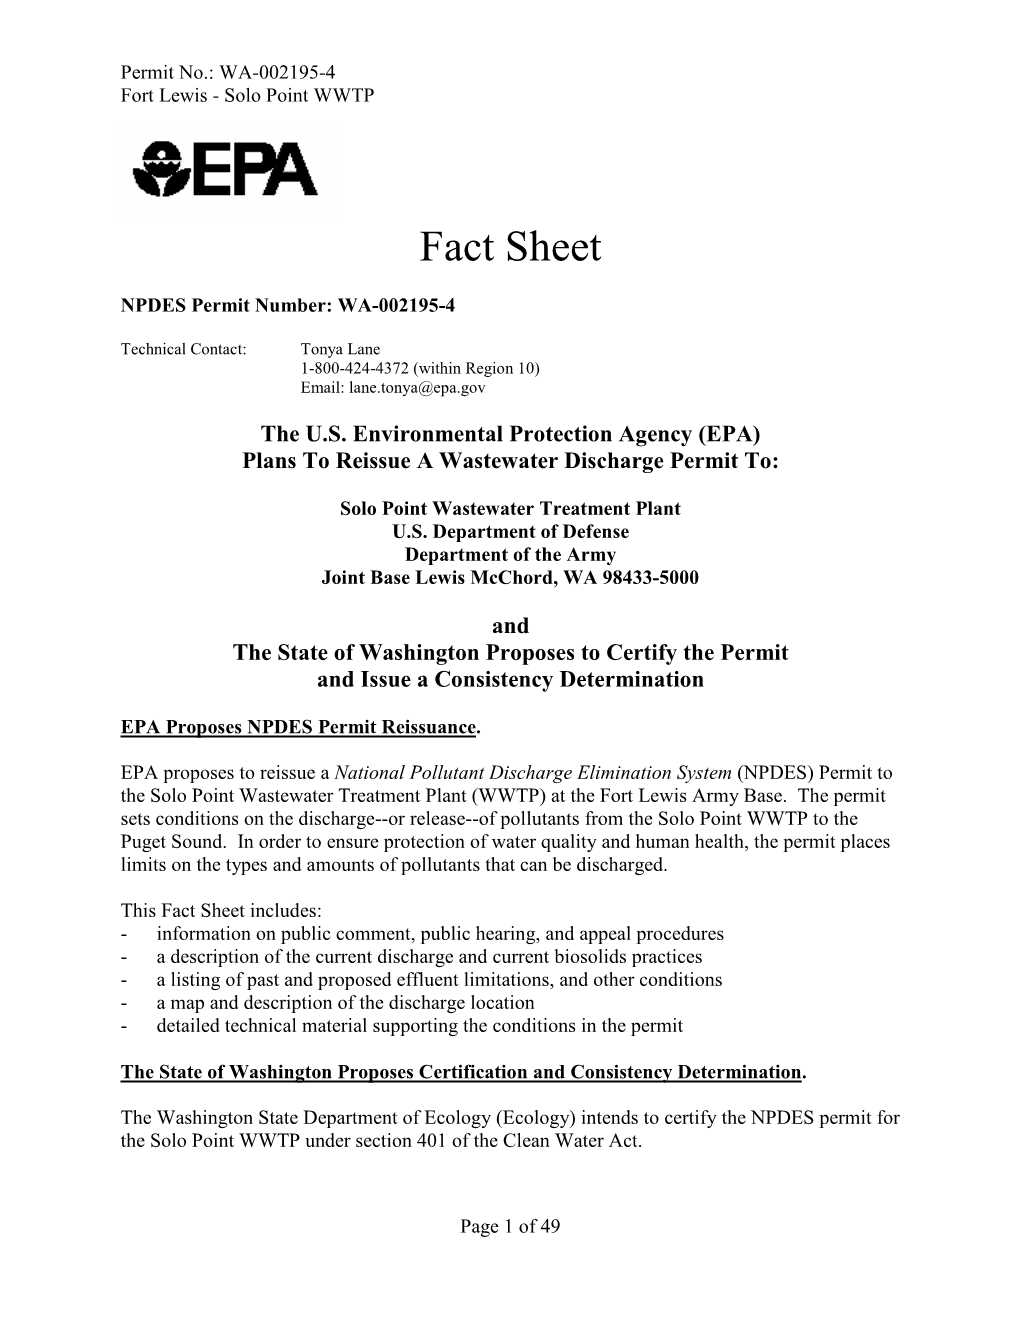 Fact Sheet for the NPDES Permit for the JBLM Solo Point WWTP